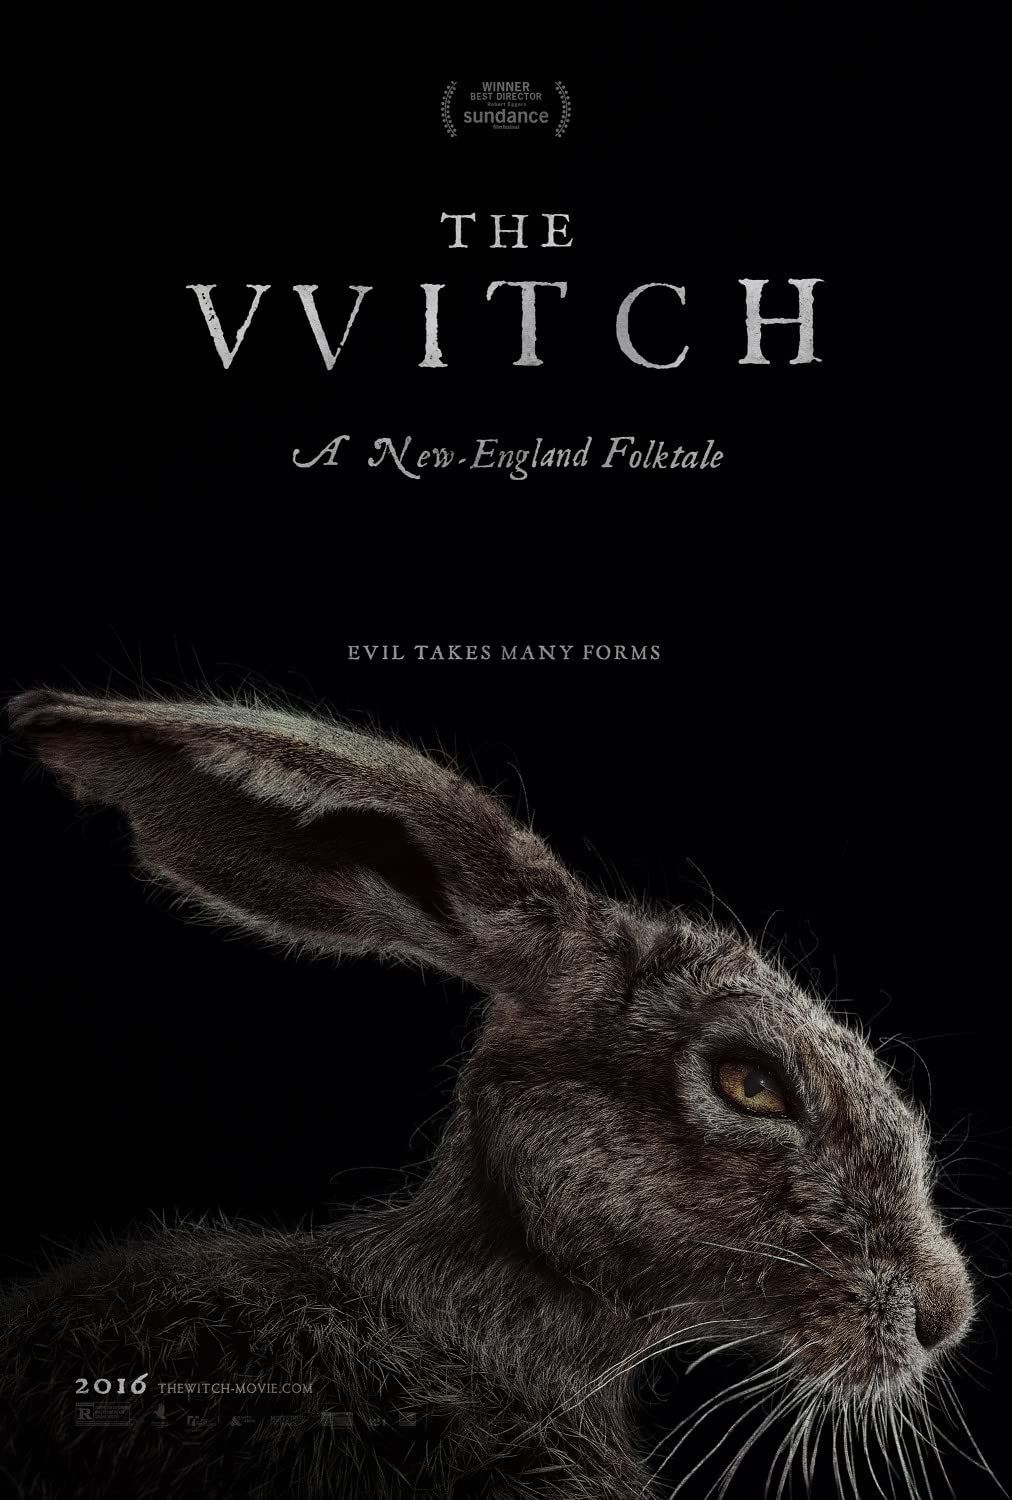 The Witch (2015) Hindi Dubbed BluRay download full movie